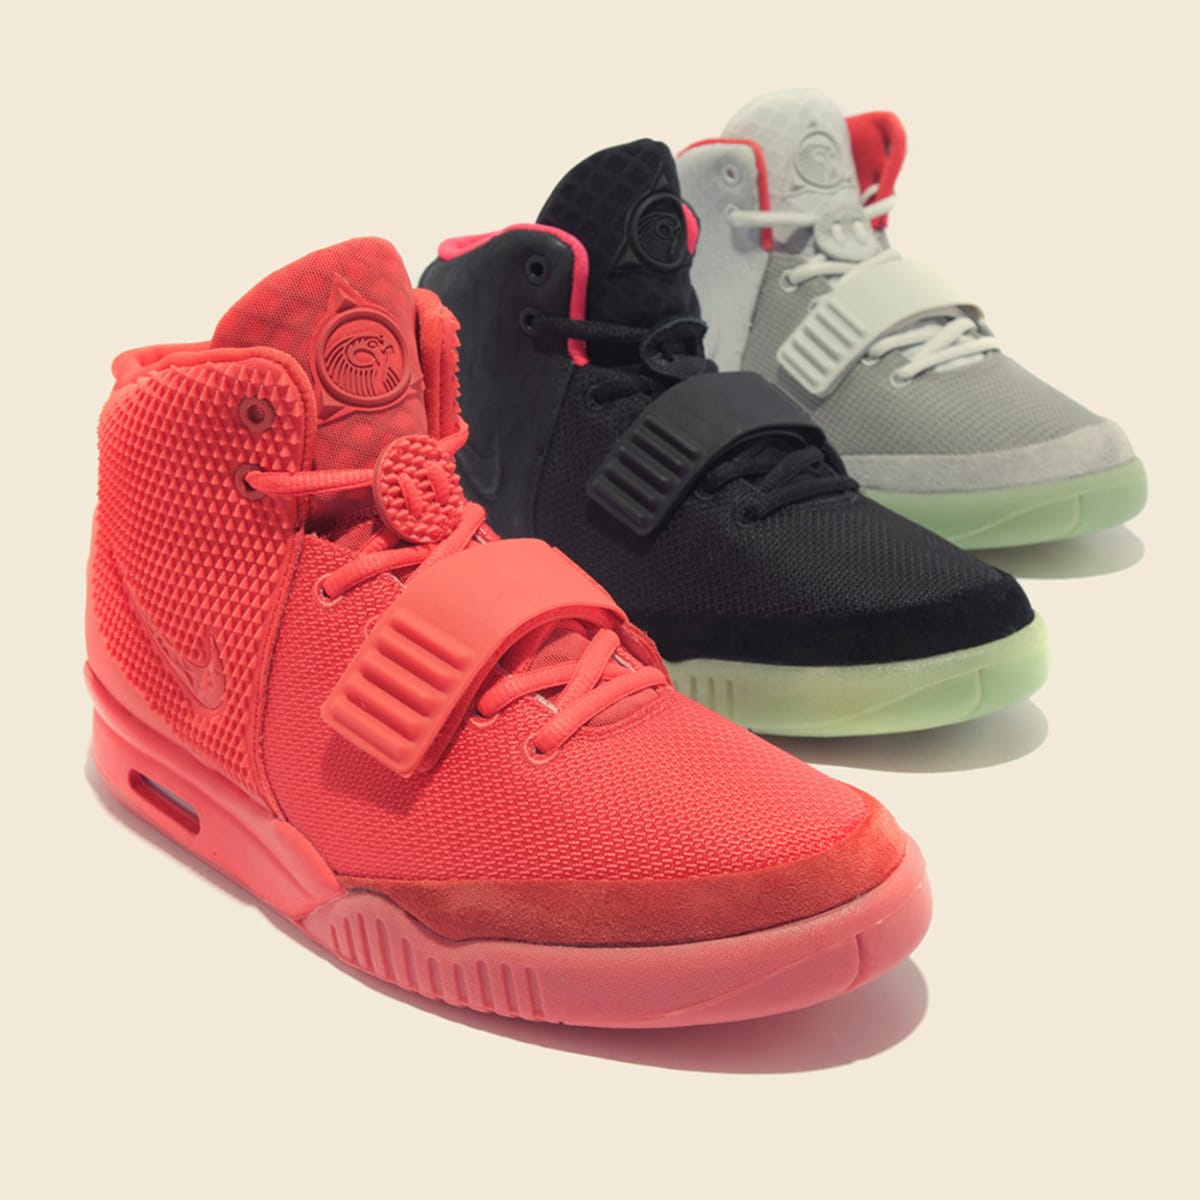 Which Yeezy Sneaker Is the Greatest of All Time? Complex